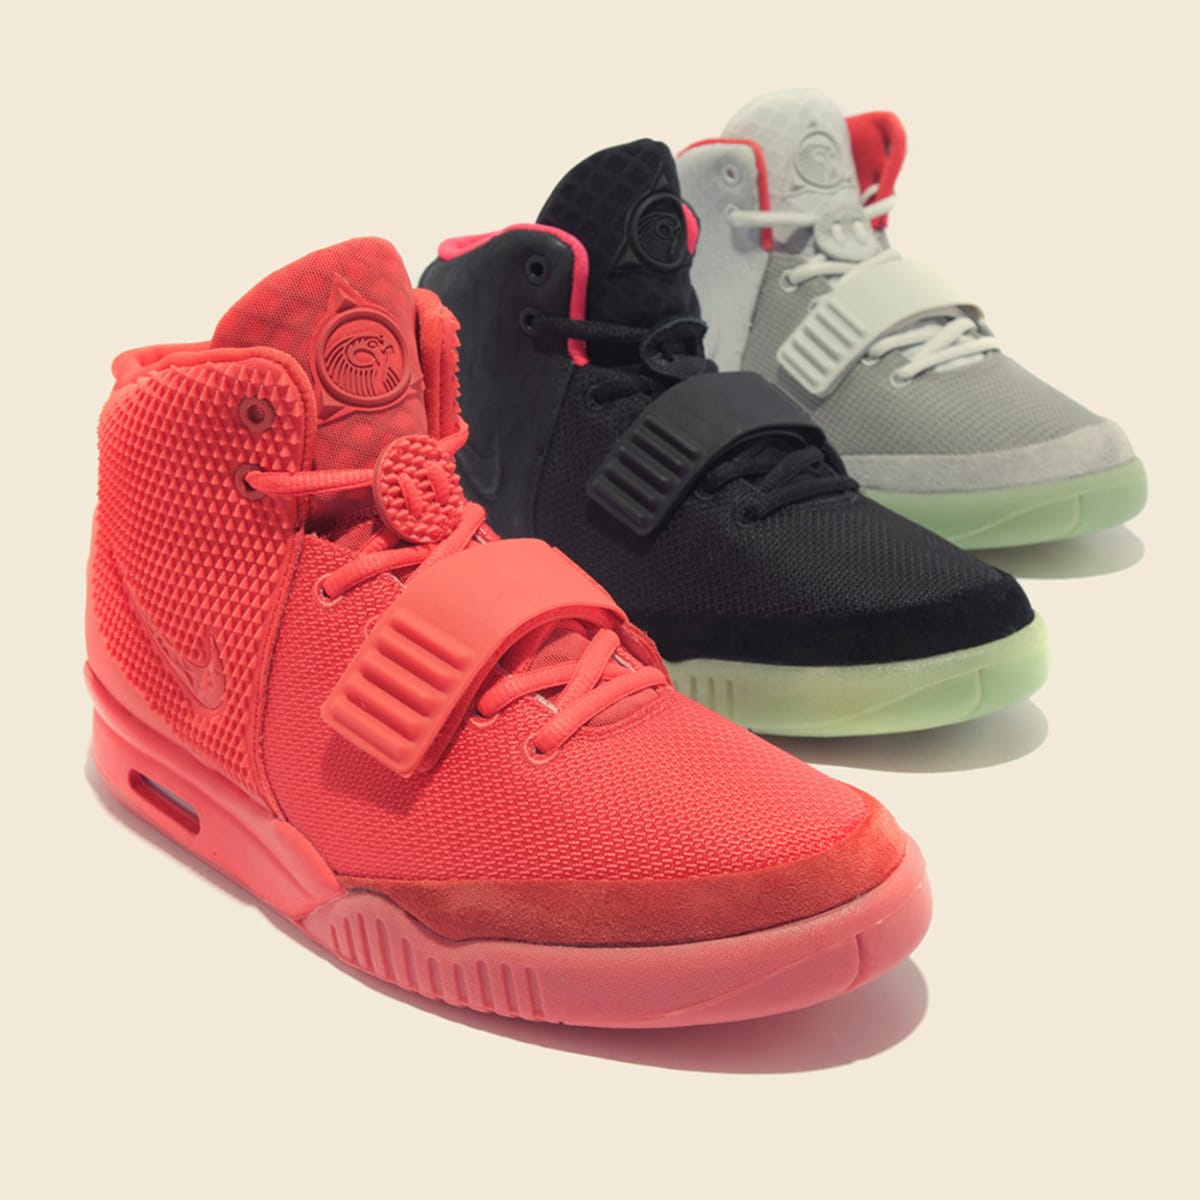 Which Yeezy Sneaker Is the Greatest of All Time? Complex